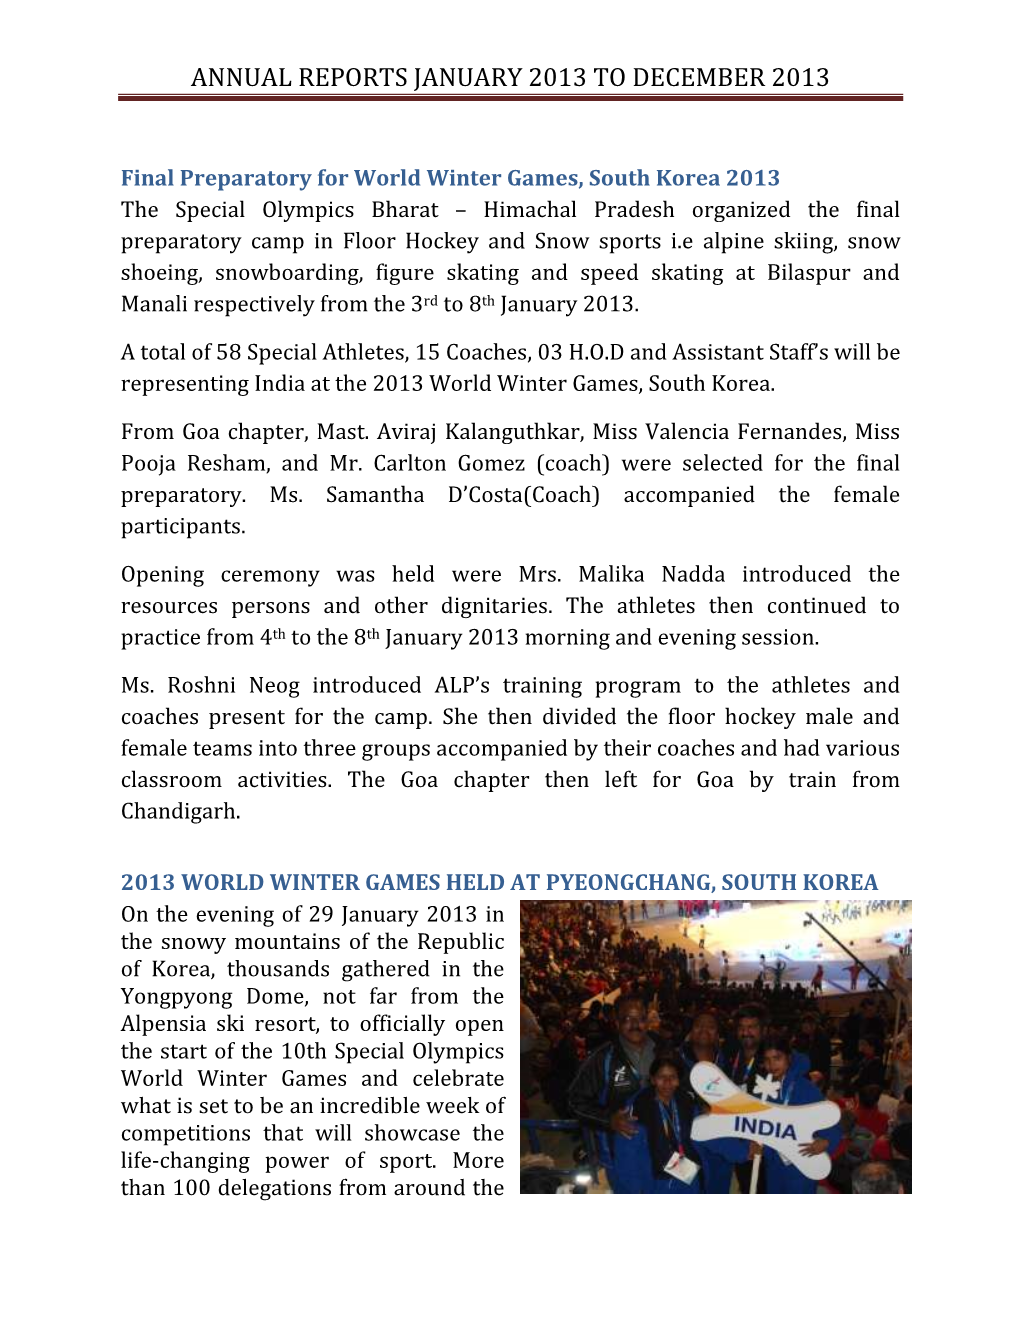 Annual Reports January 2013 to December 2013